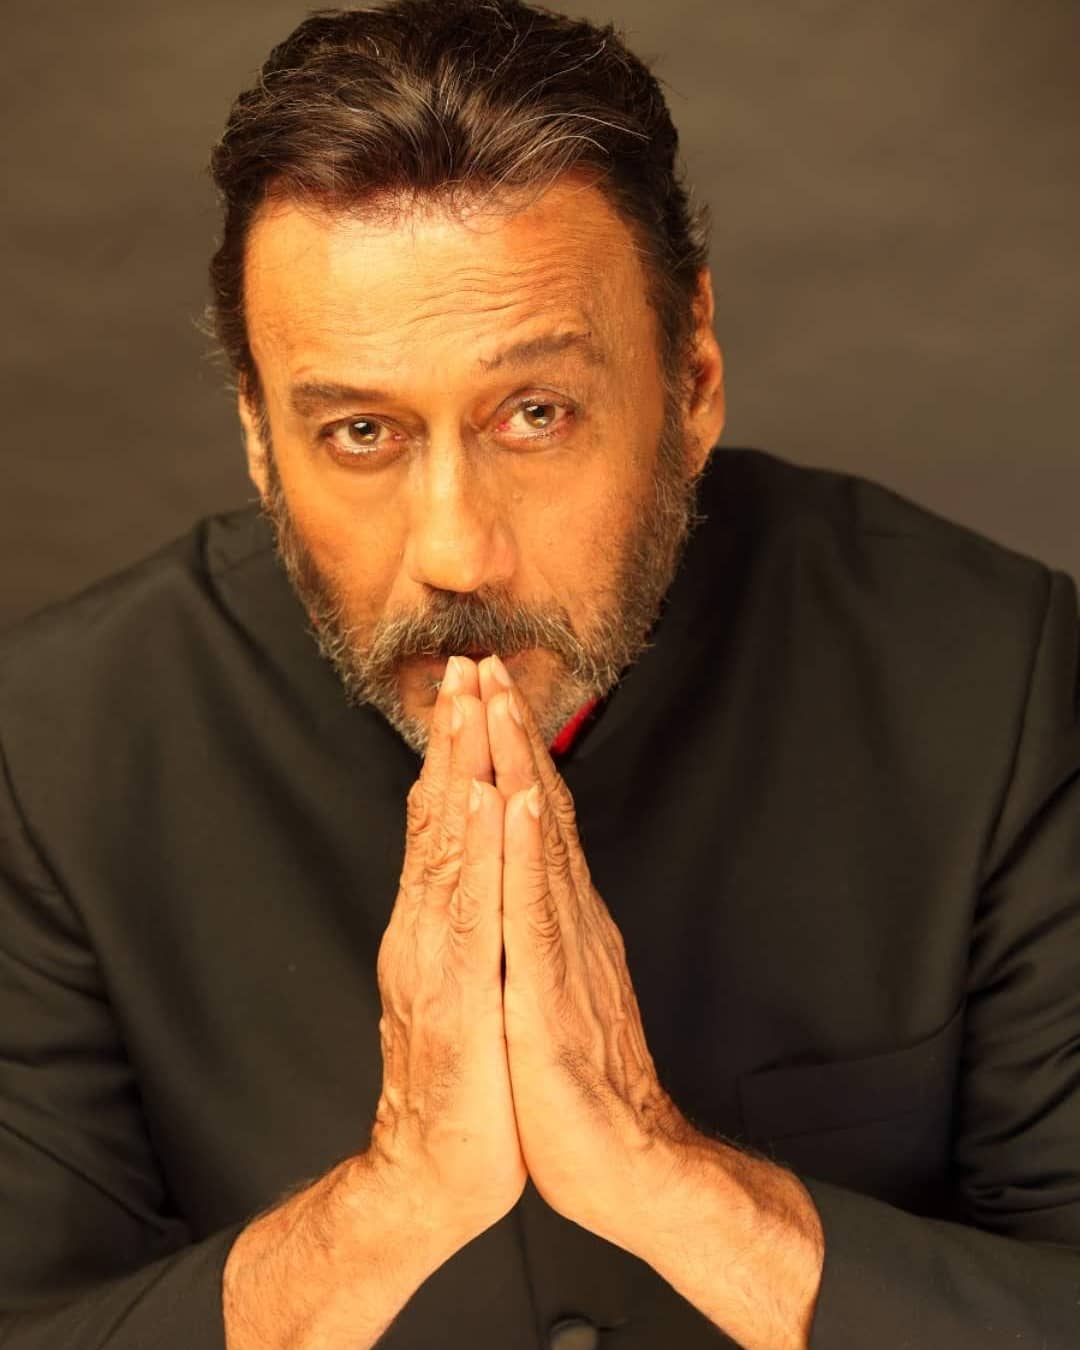 209202413 526872698511316 4395299722724441992 n Actor Jackie Shroff, who once spent childhood in a chawl, lives a very luxurious lifestyle today, know his net worth